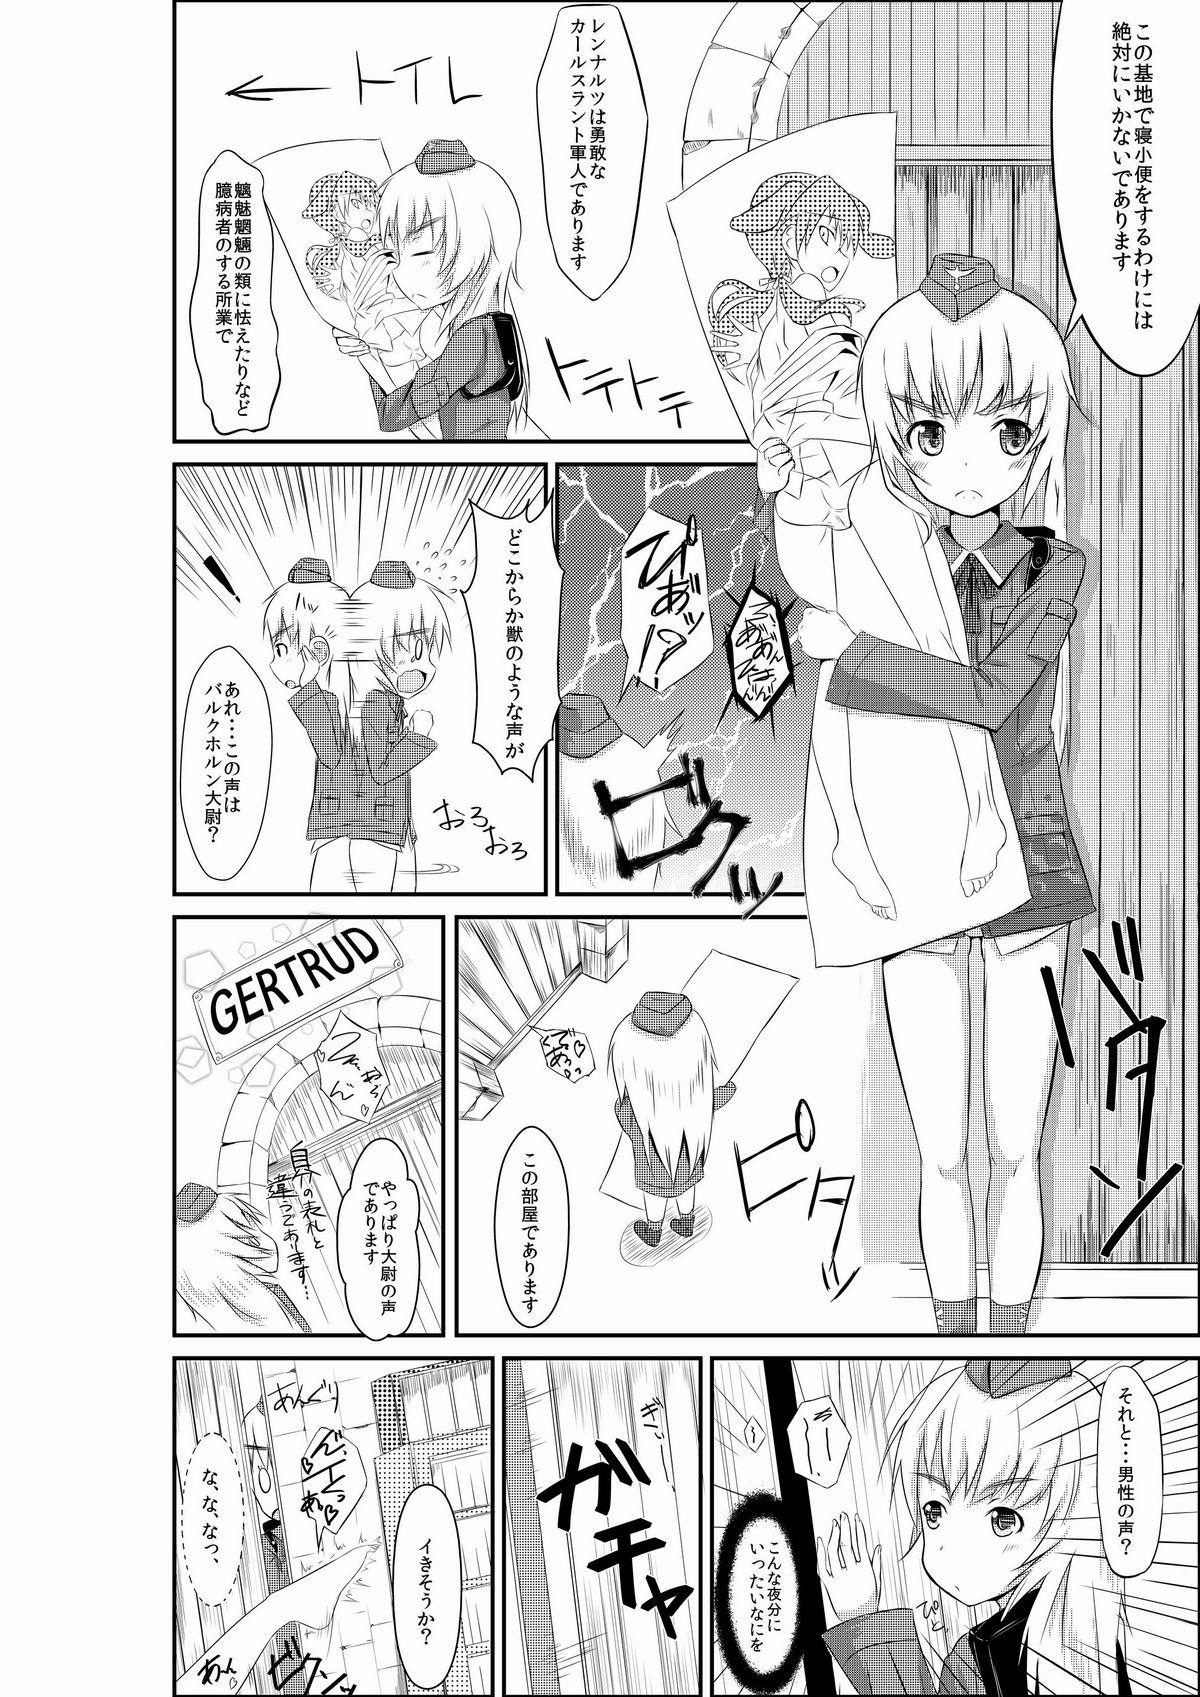 Beach 練習 お姉ちゃんとヘルマちゃん - Strike witches Amateur Cumshots - Page 2